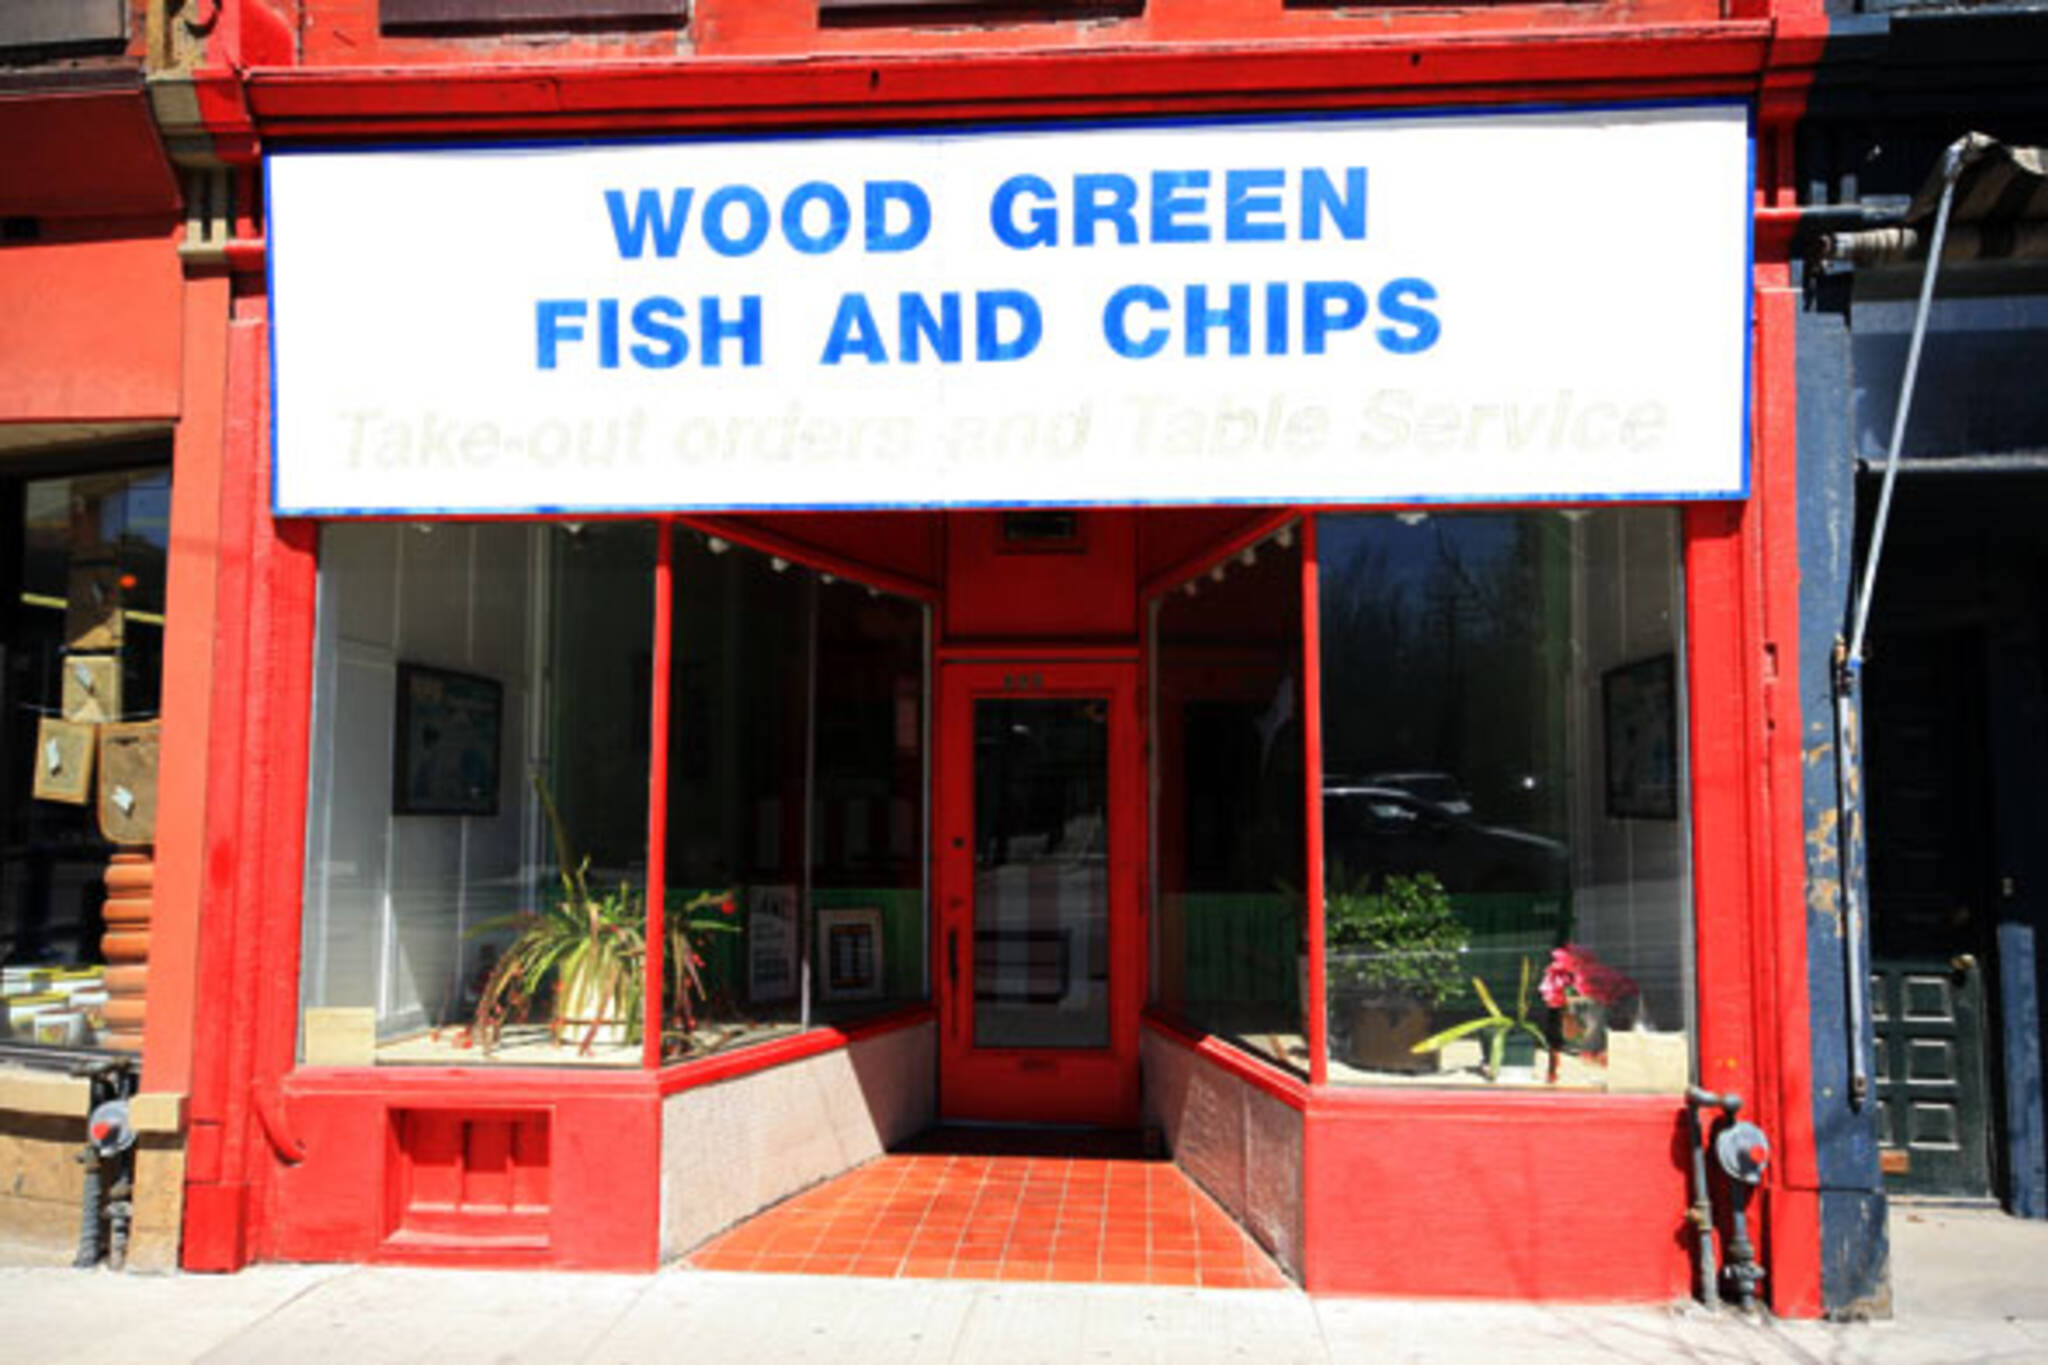 Wood Green Fish and Chips